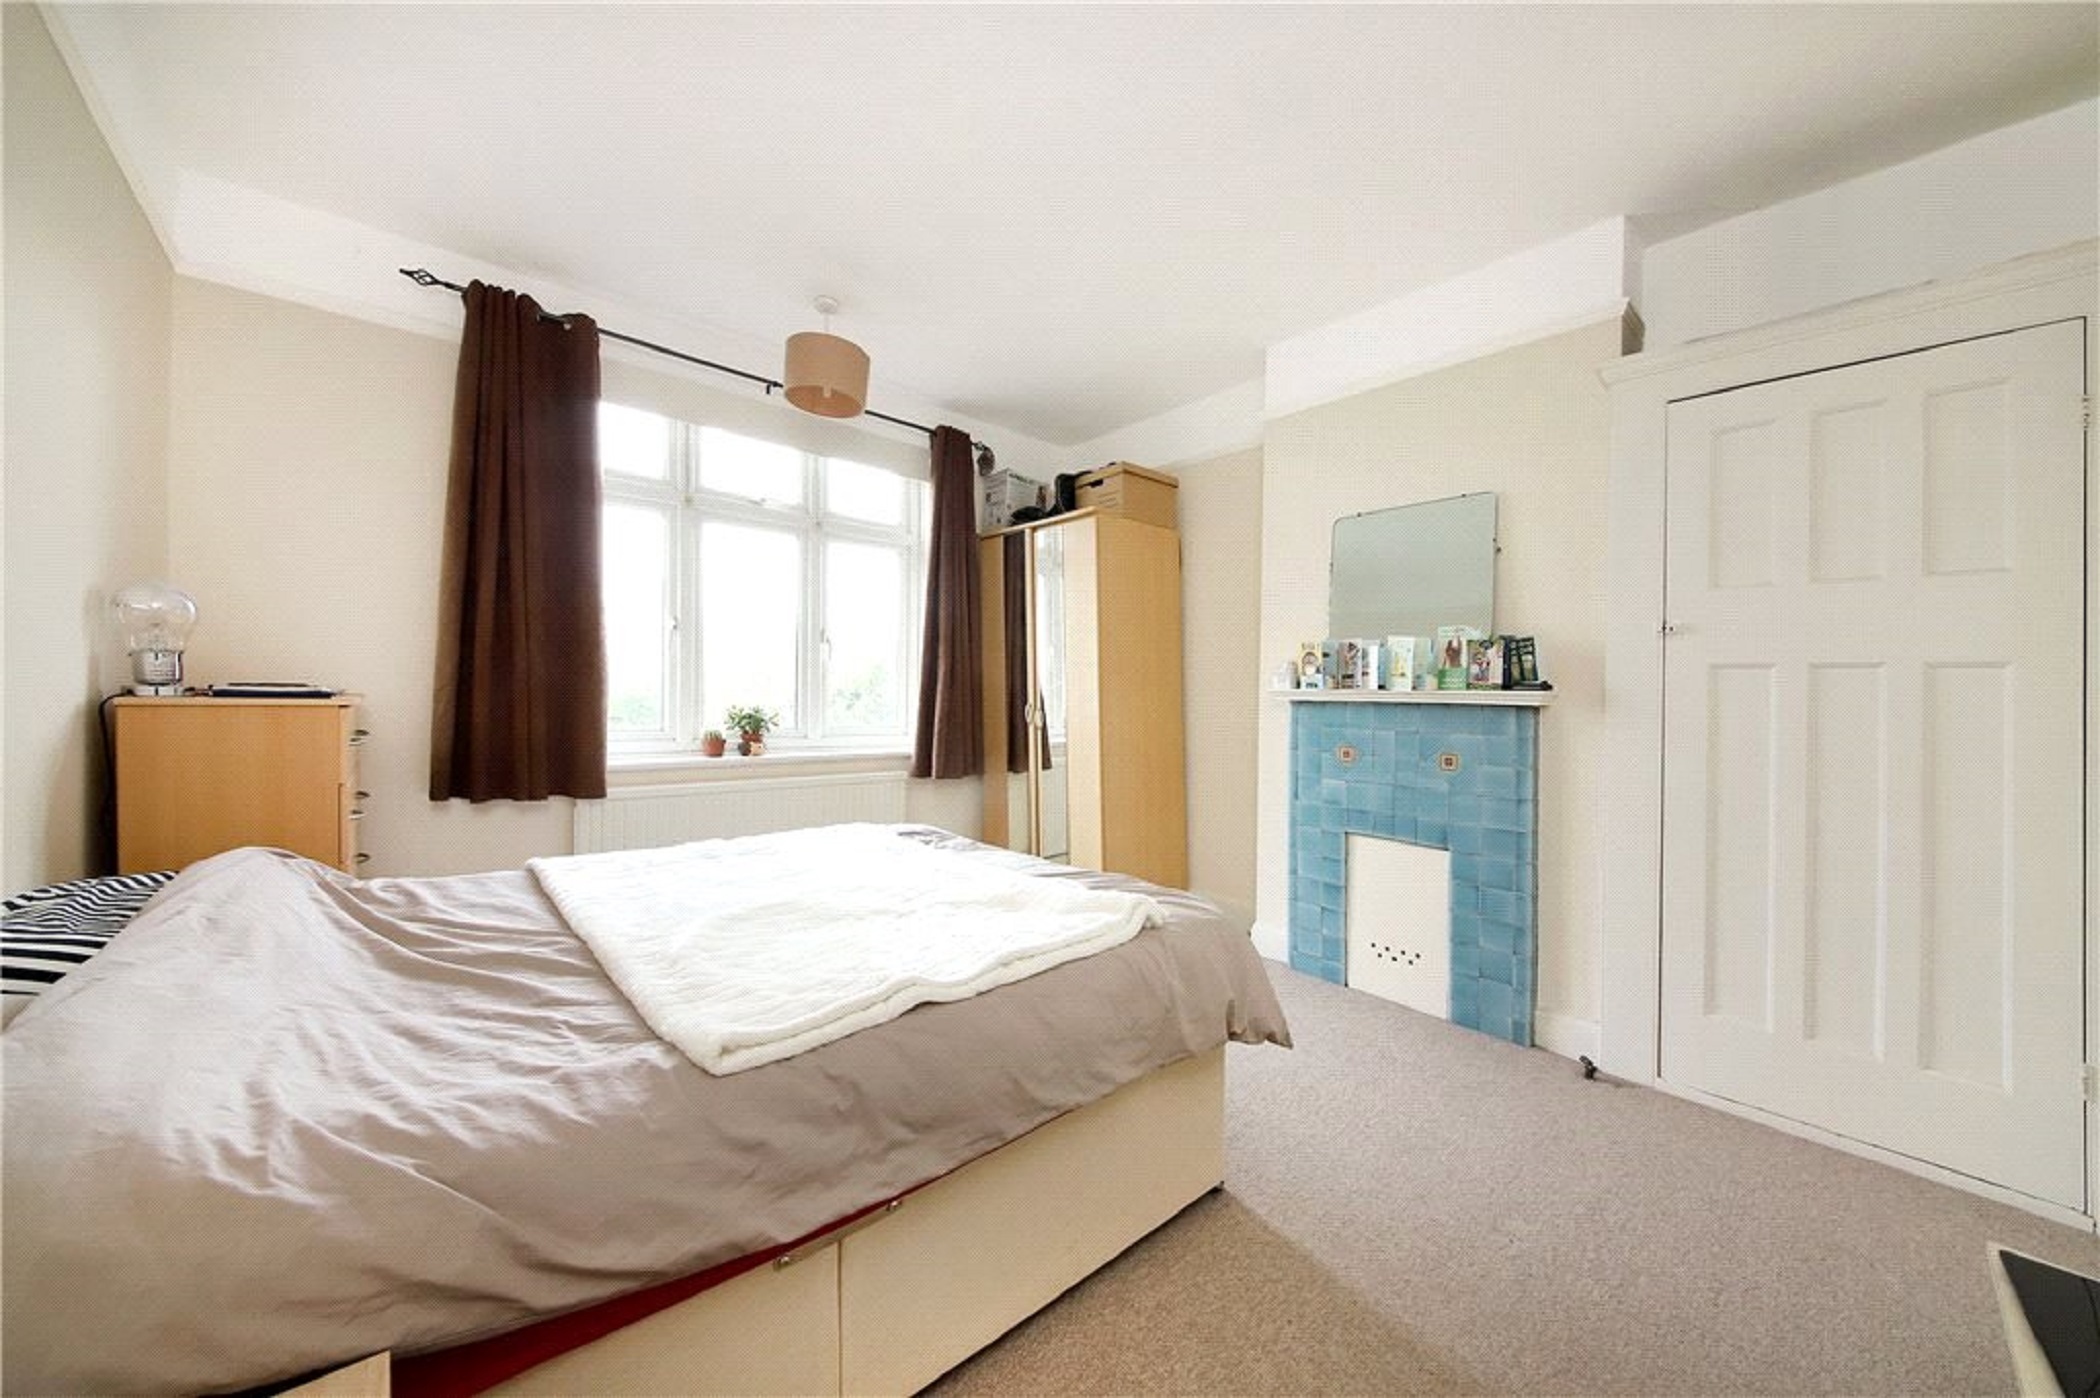 2 bedroom flat sharing in Bermondsey London, SE1 RoomsLocal image